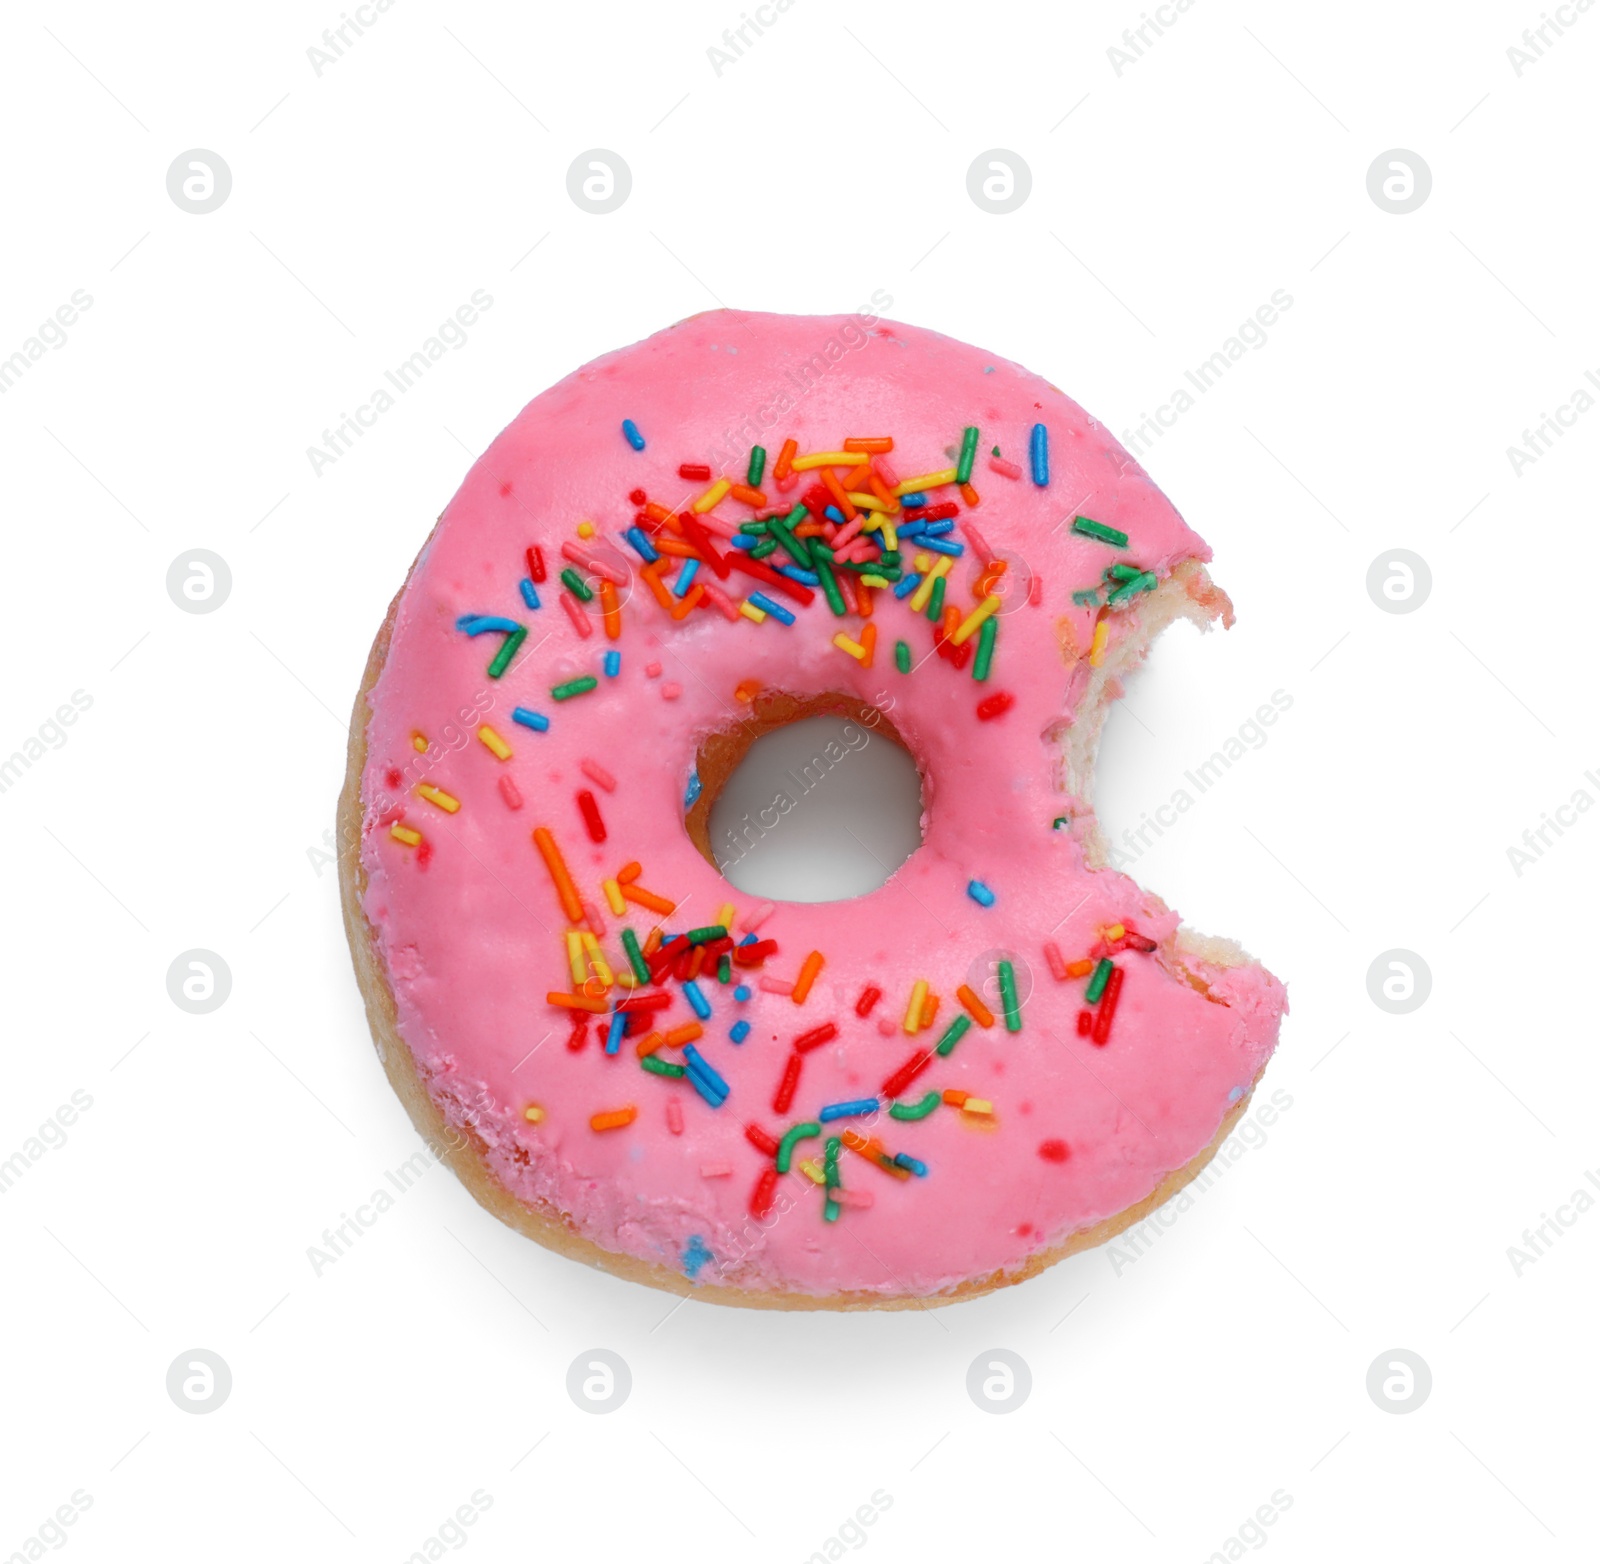 Photo of Sweet bitten glazed donut on white background, top view